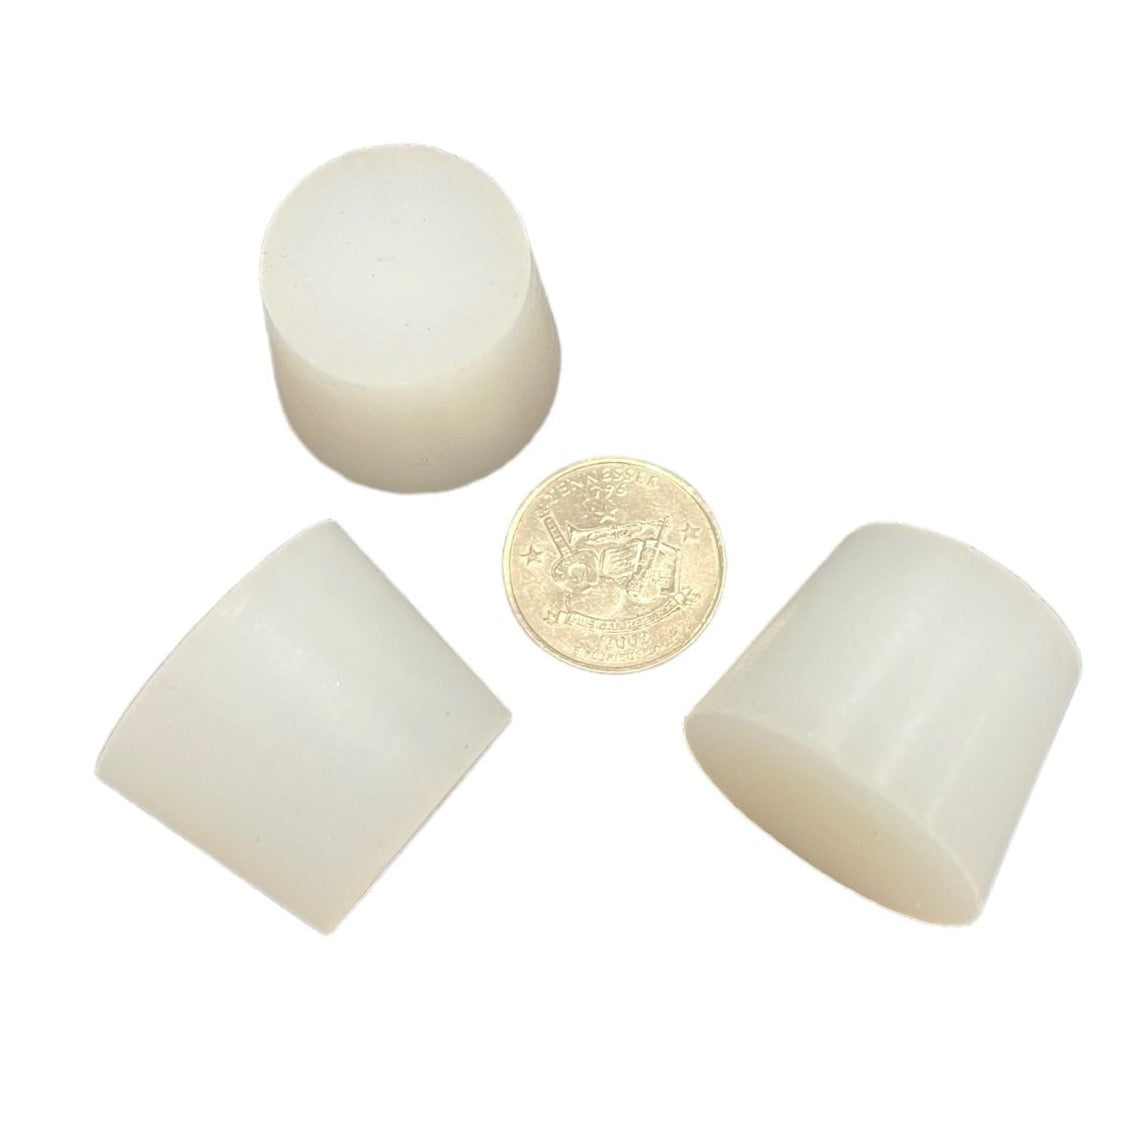 Silicone Tapered Plugs 1.062 x 1.31 x 1" (10 Count)